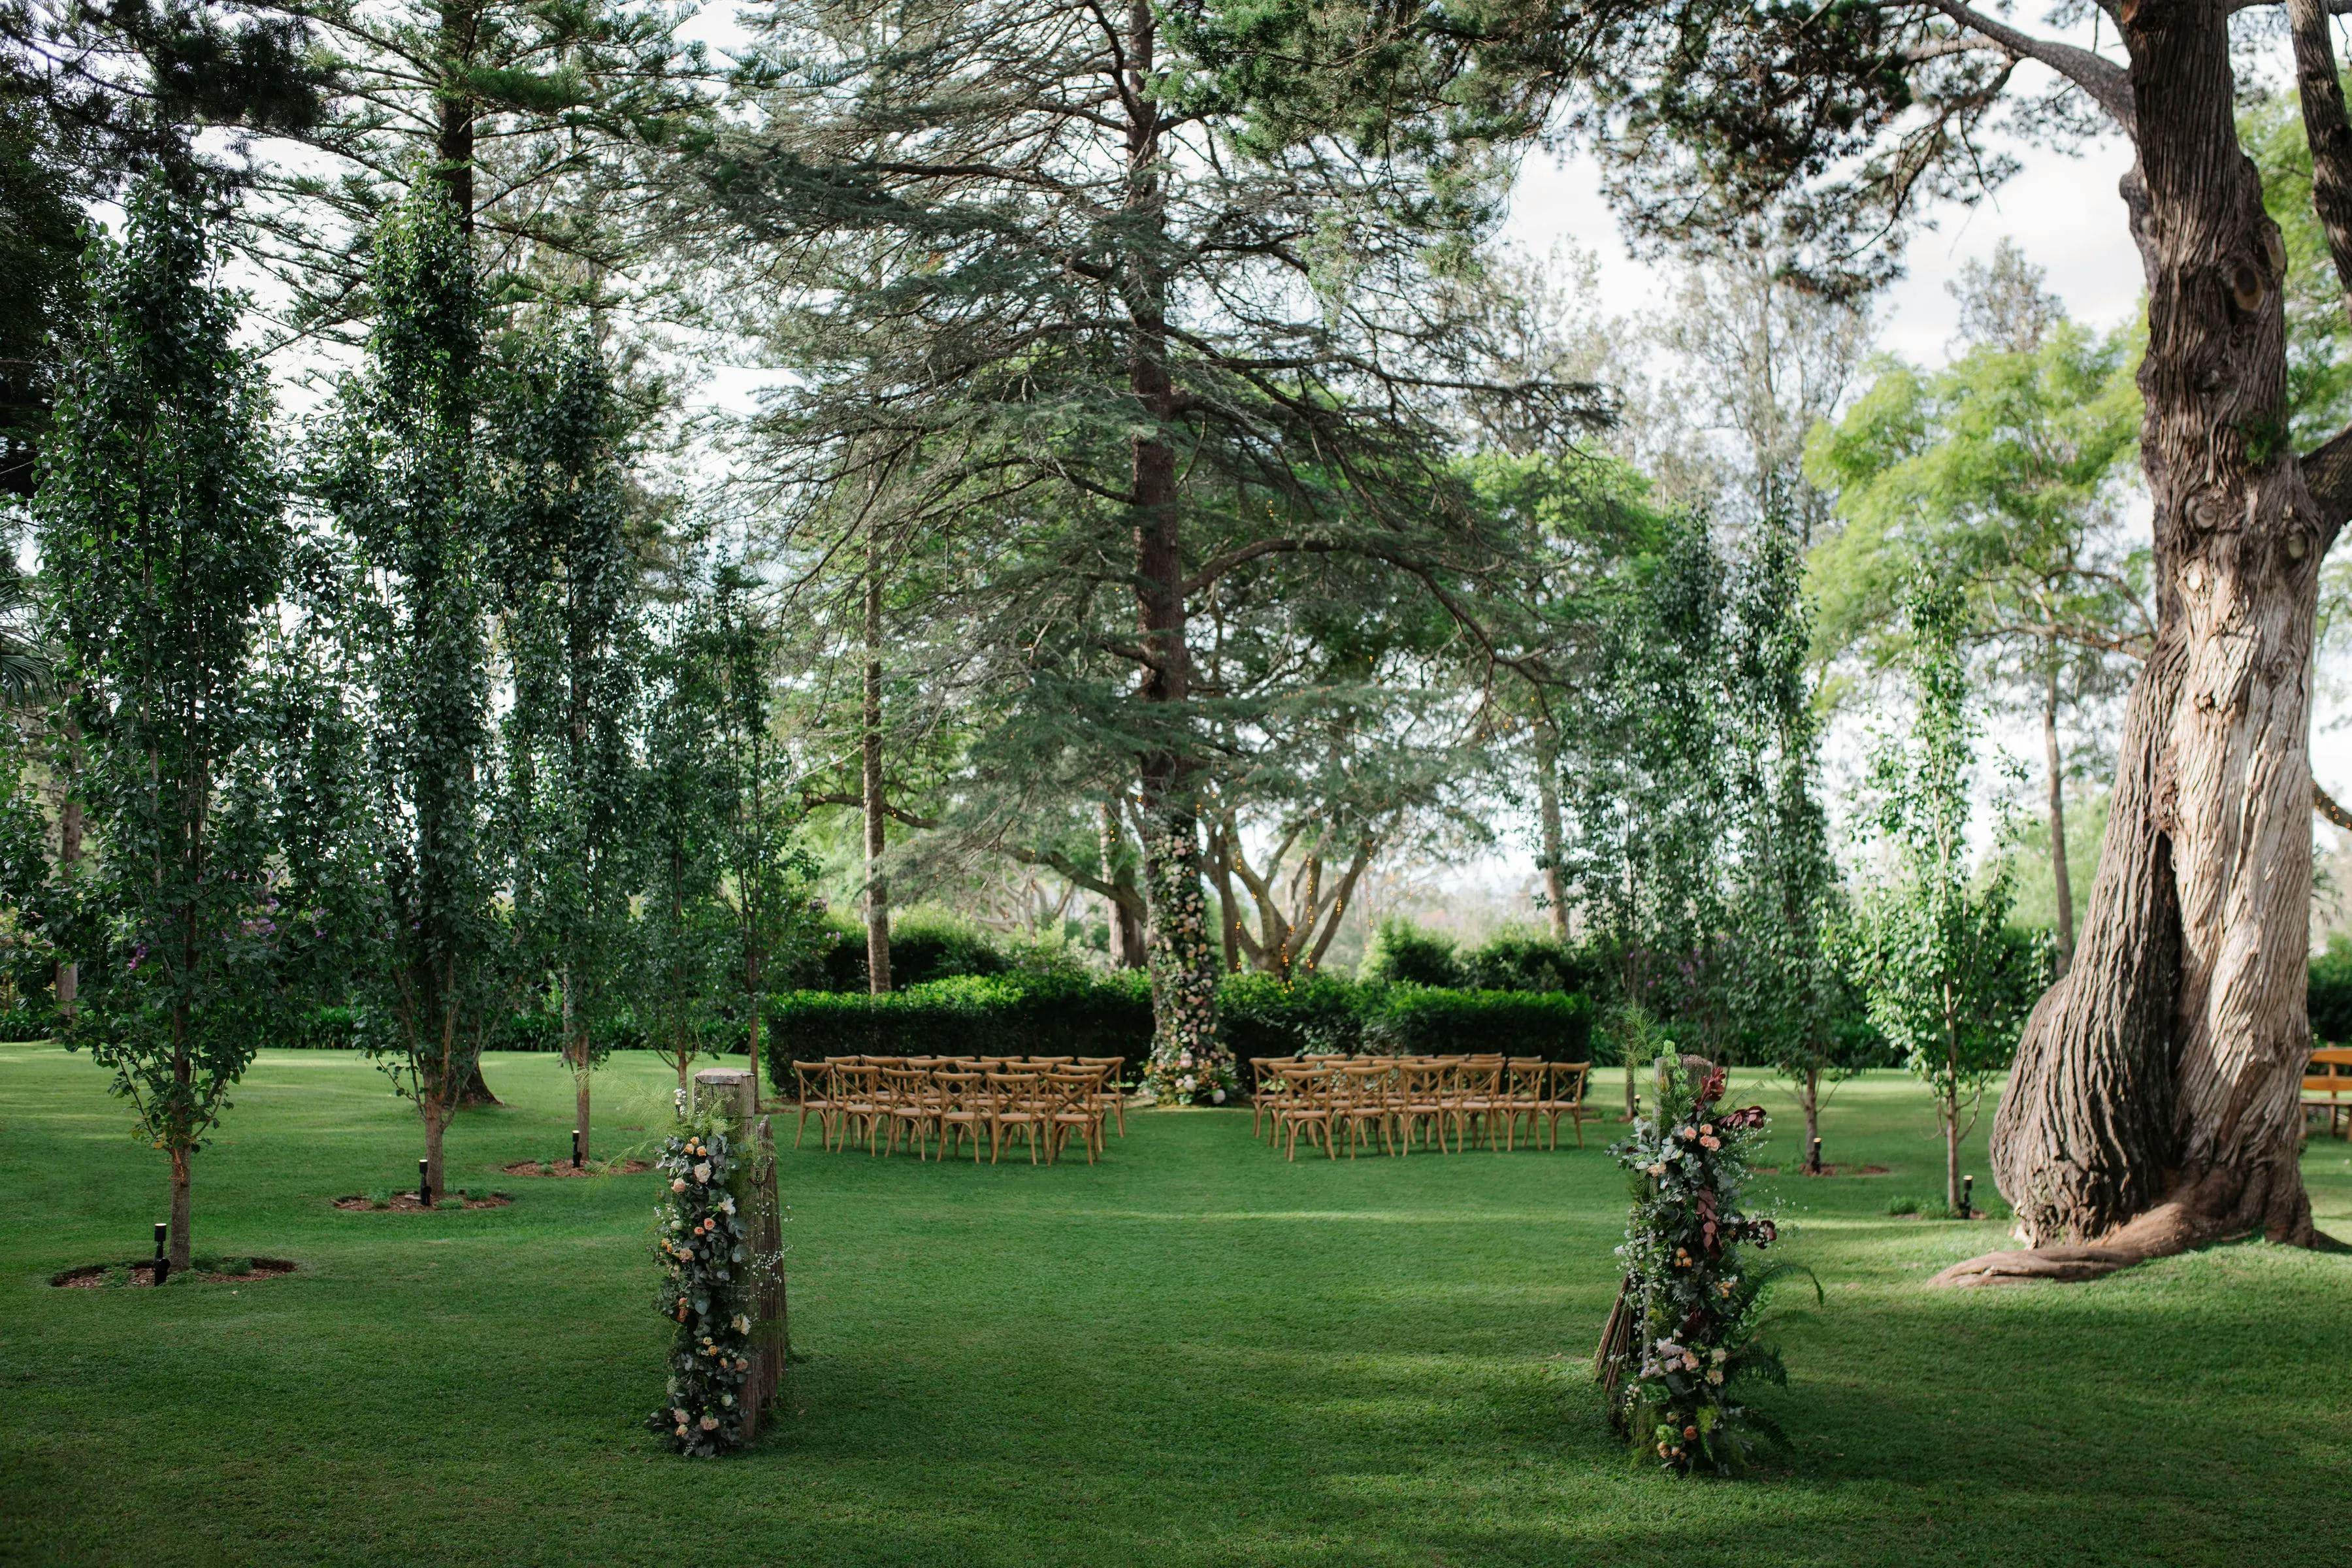 A serene outdoor wedding setup with wooden chairs arranged in rows facing forward under large trees. The grassy aisle is flanked by tall, sparse trees and floral arrangements, leading to an altar area adorned with flowers, set against a backdrop of lush greenery.